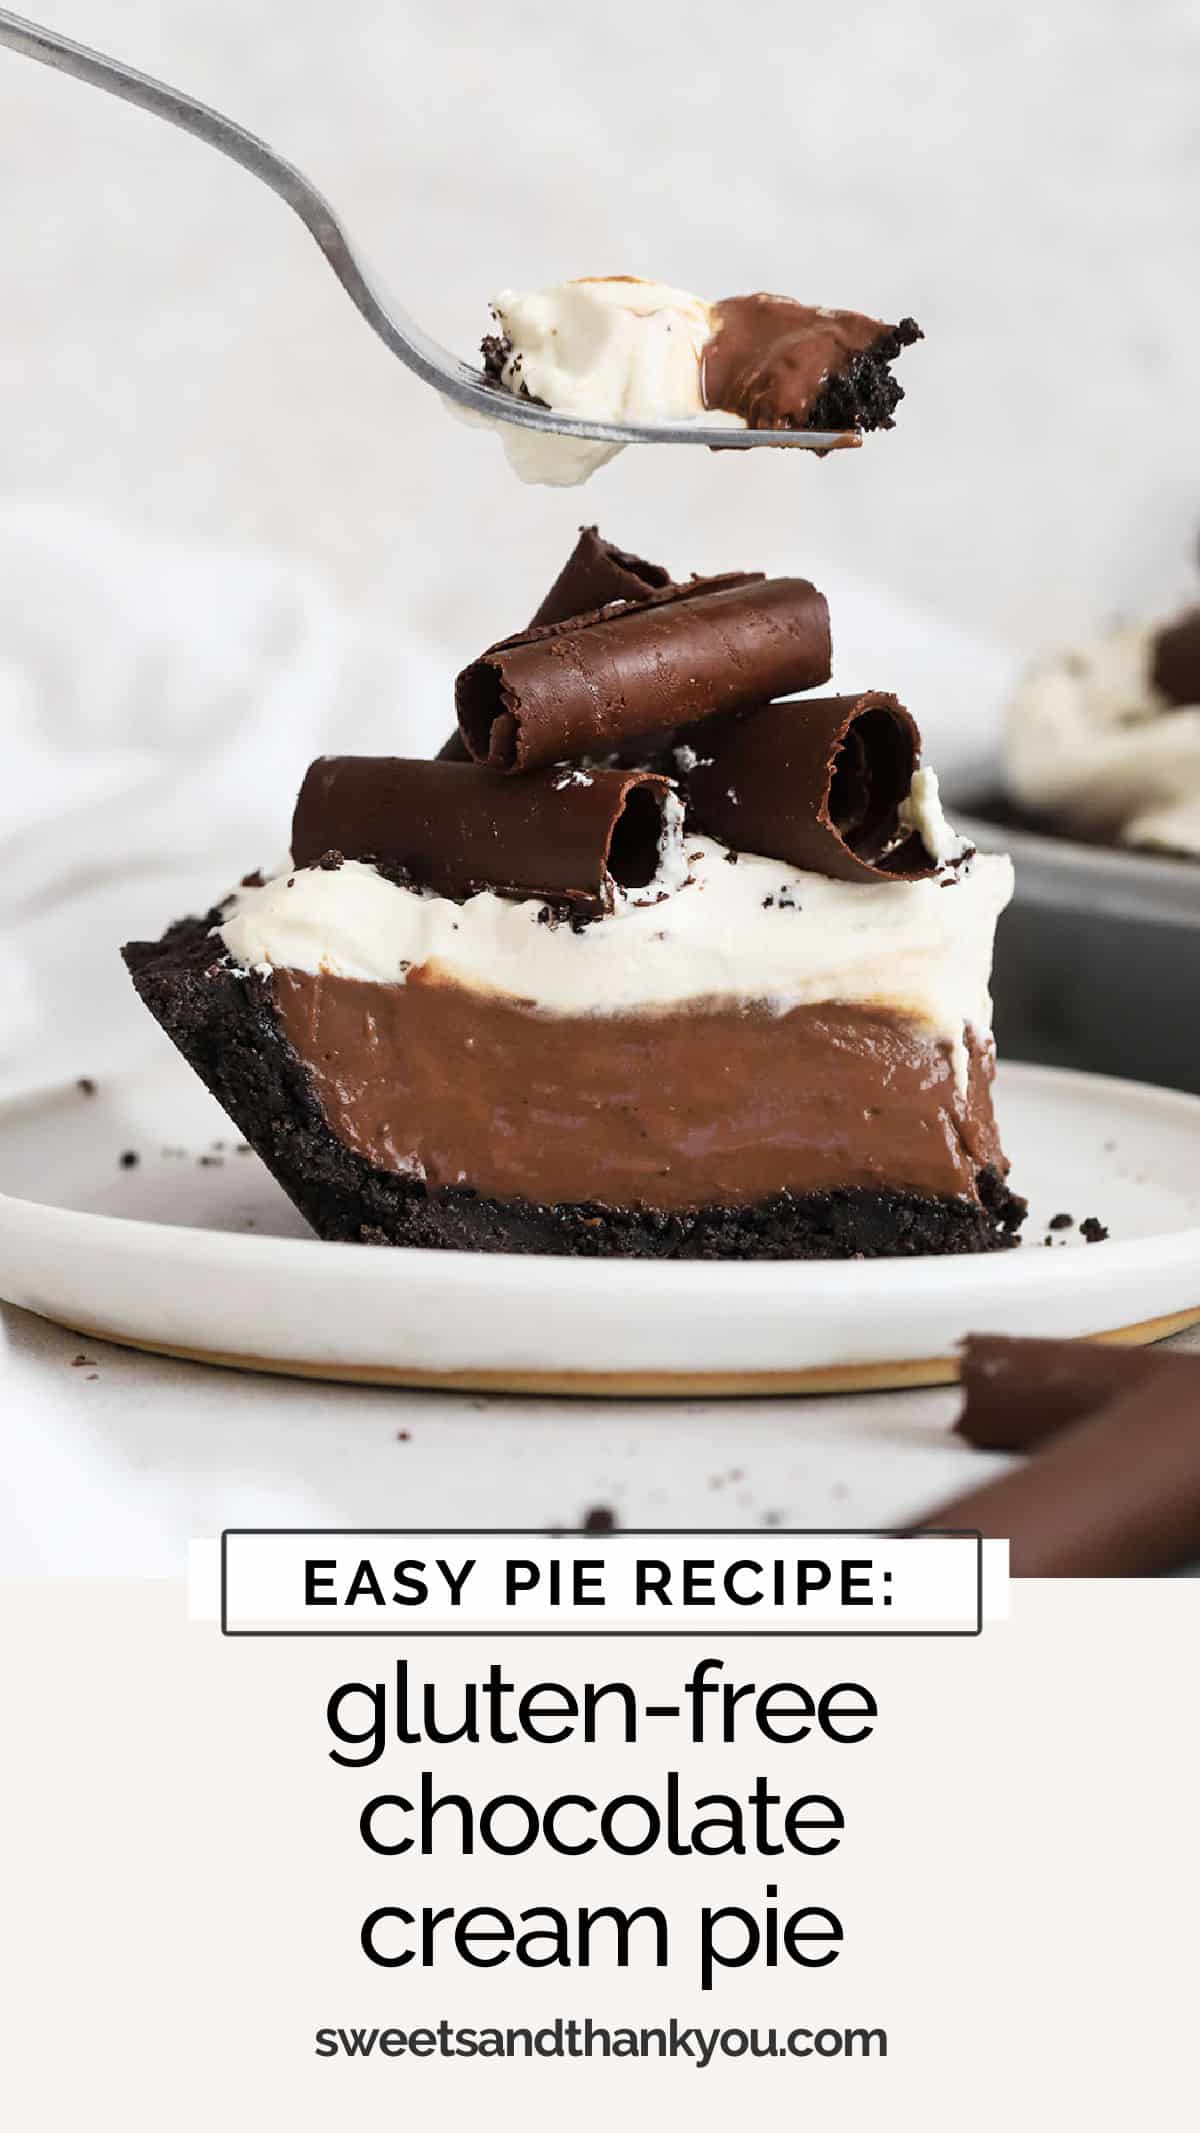 This easy gluten-free chocolate pie recipe is made with an easy chocolate cookie crust, decadent chocolate pudding pie filling, and fluffy whipped cream. It's probably the most popular gluten-free Thanksgiving pie recipe we ever serve, though this gluten-free chocolate cream pie is amazing for birthdays, holidays & celebrations, too! 